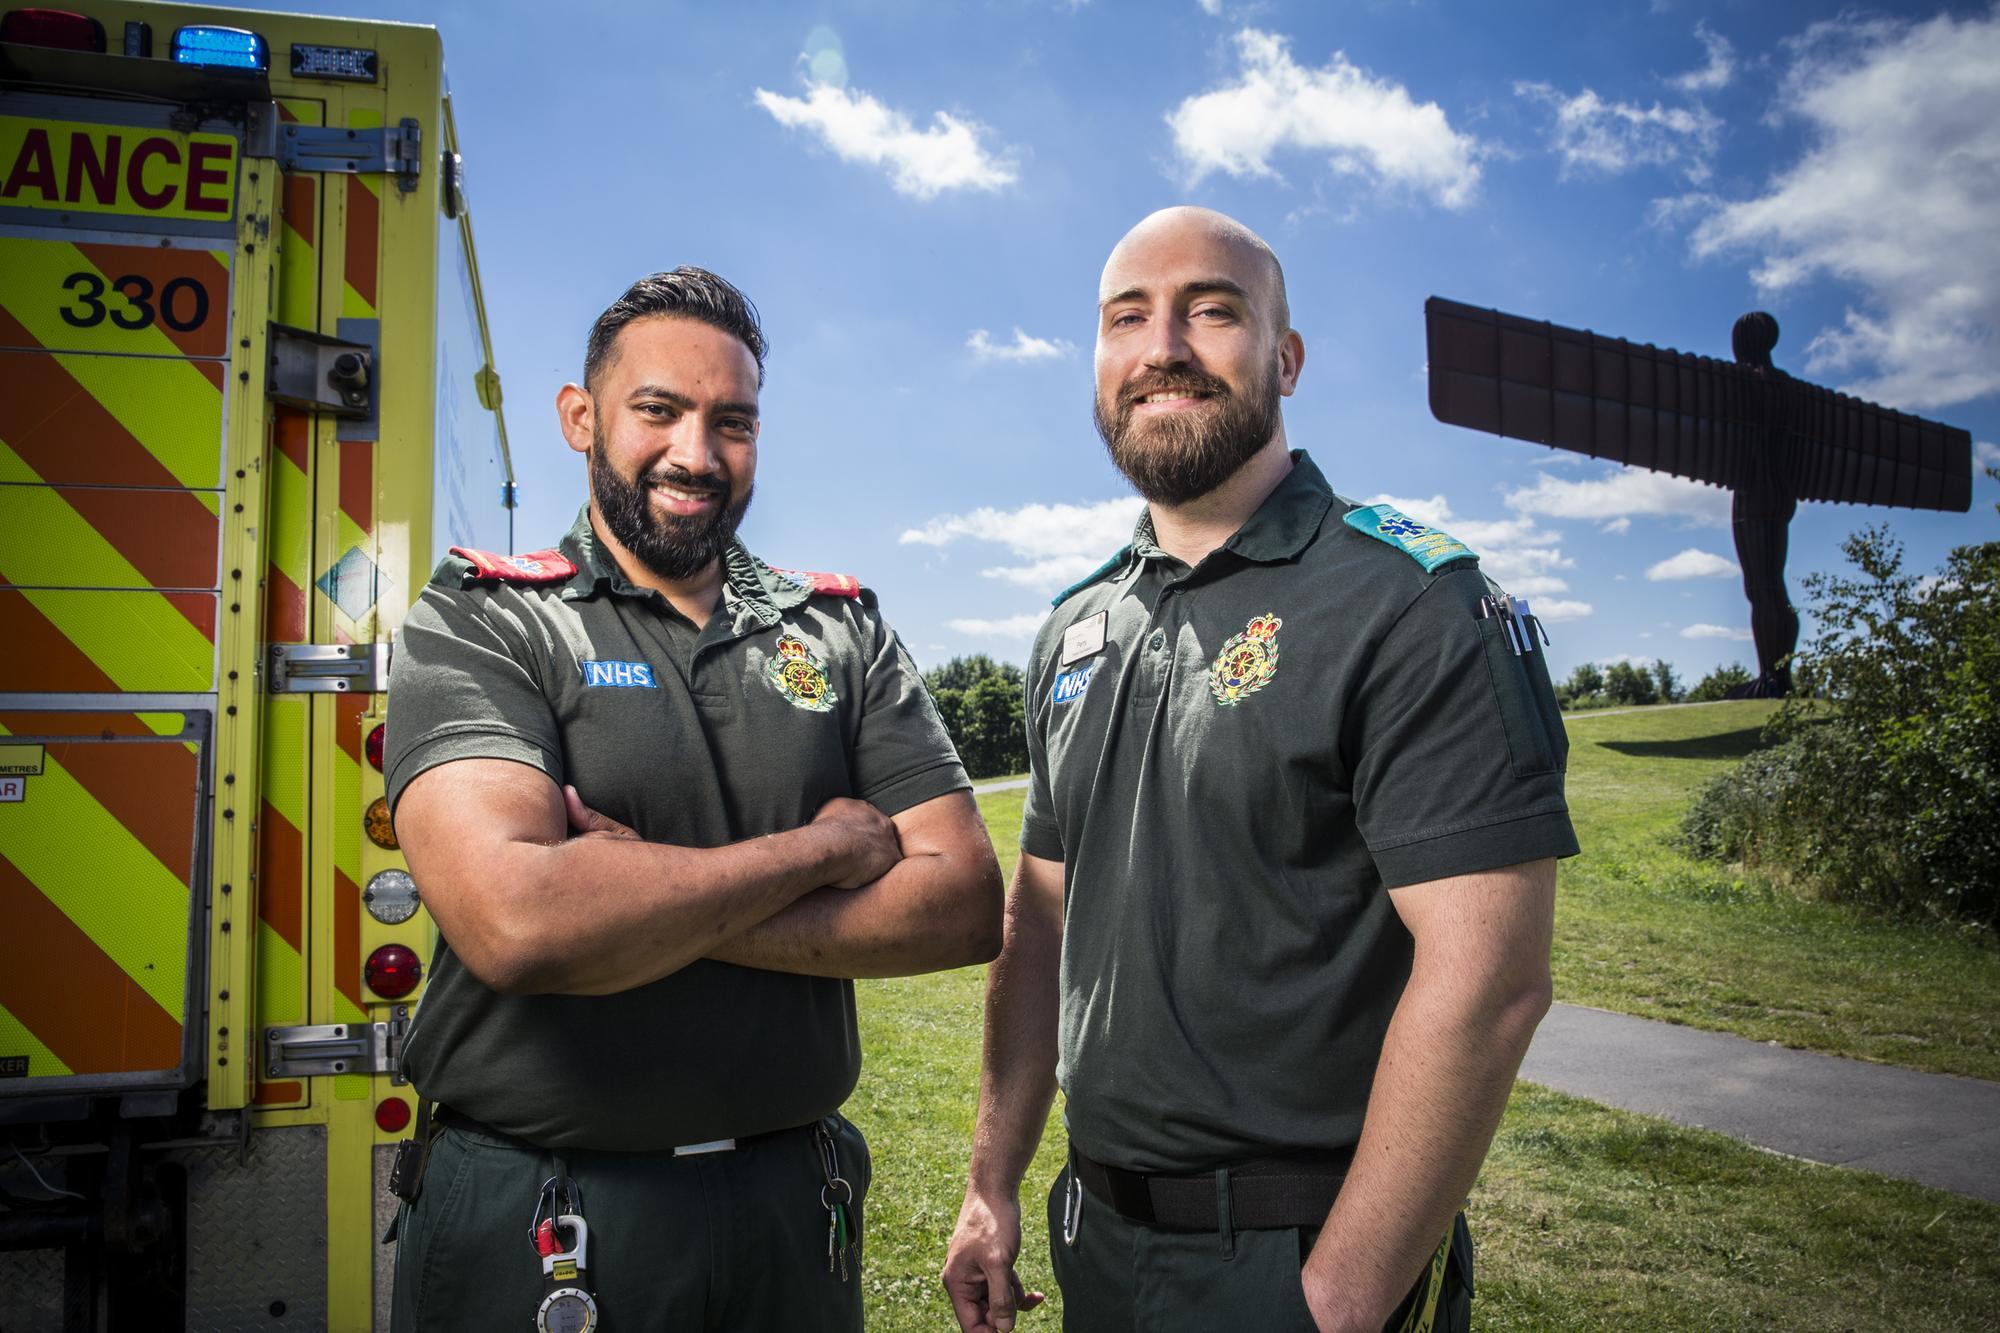 North East Ambulance Service sends out call for new recruits